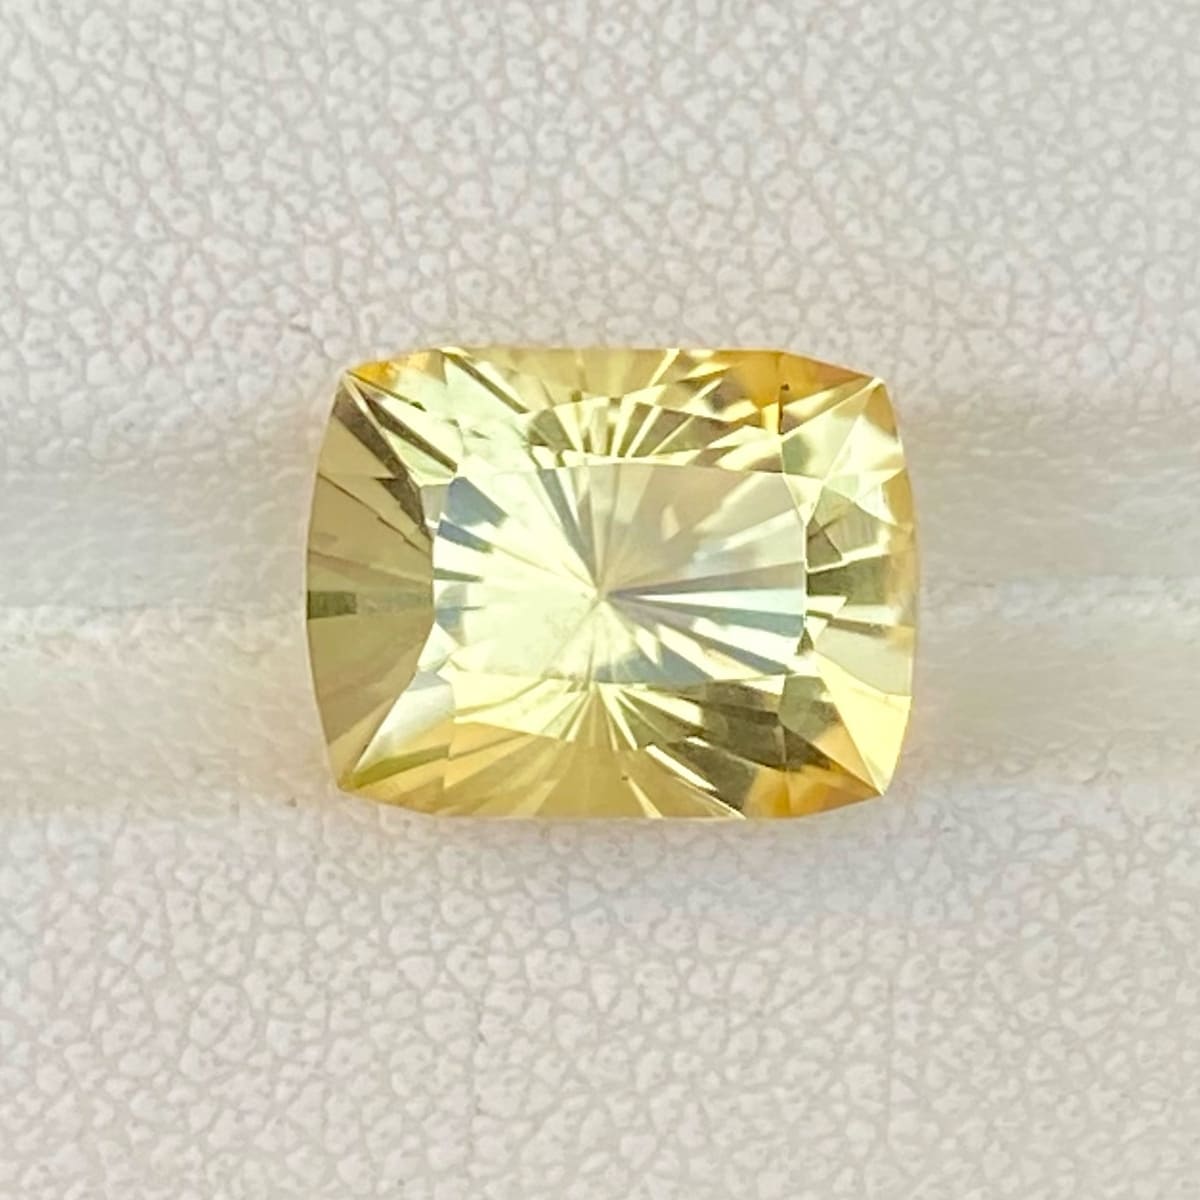 Gorgeously Faceted Golden Citrine